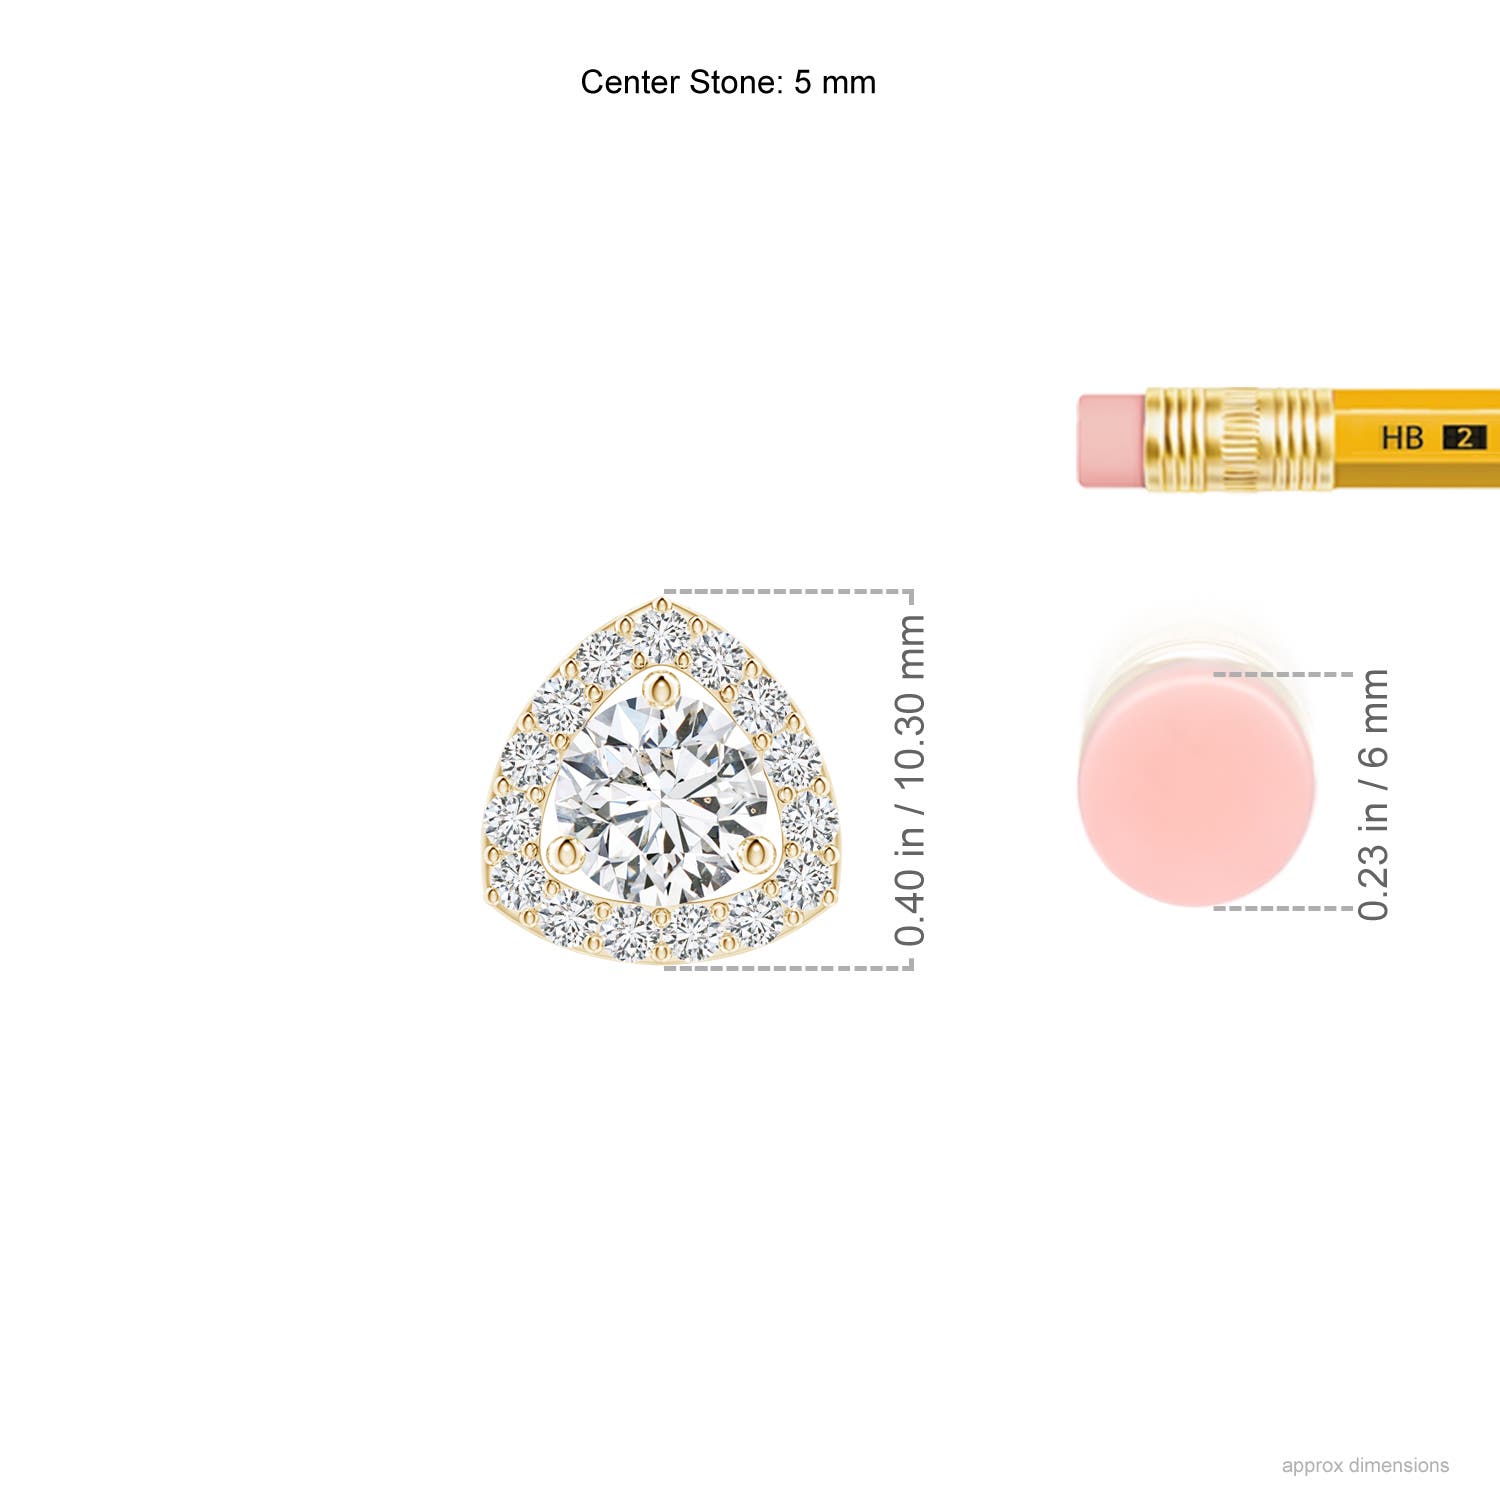 H, SI2 / 0.68 CT / 14 KT Yellow Gold